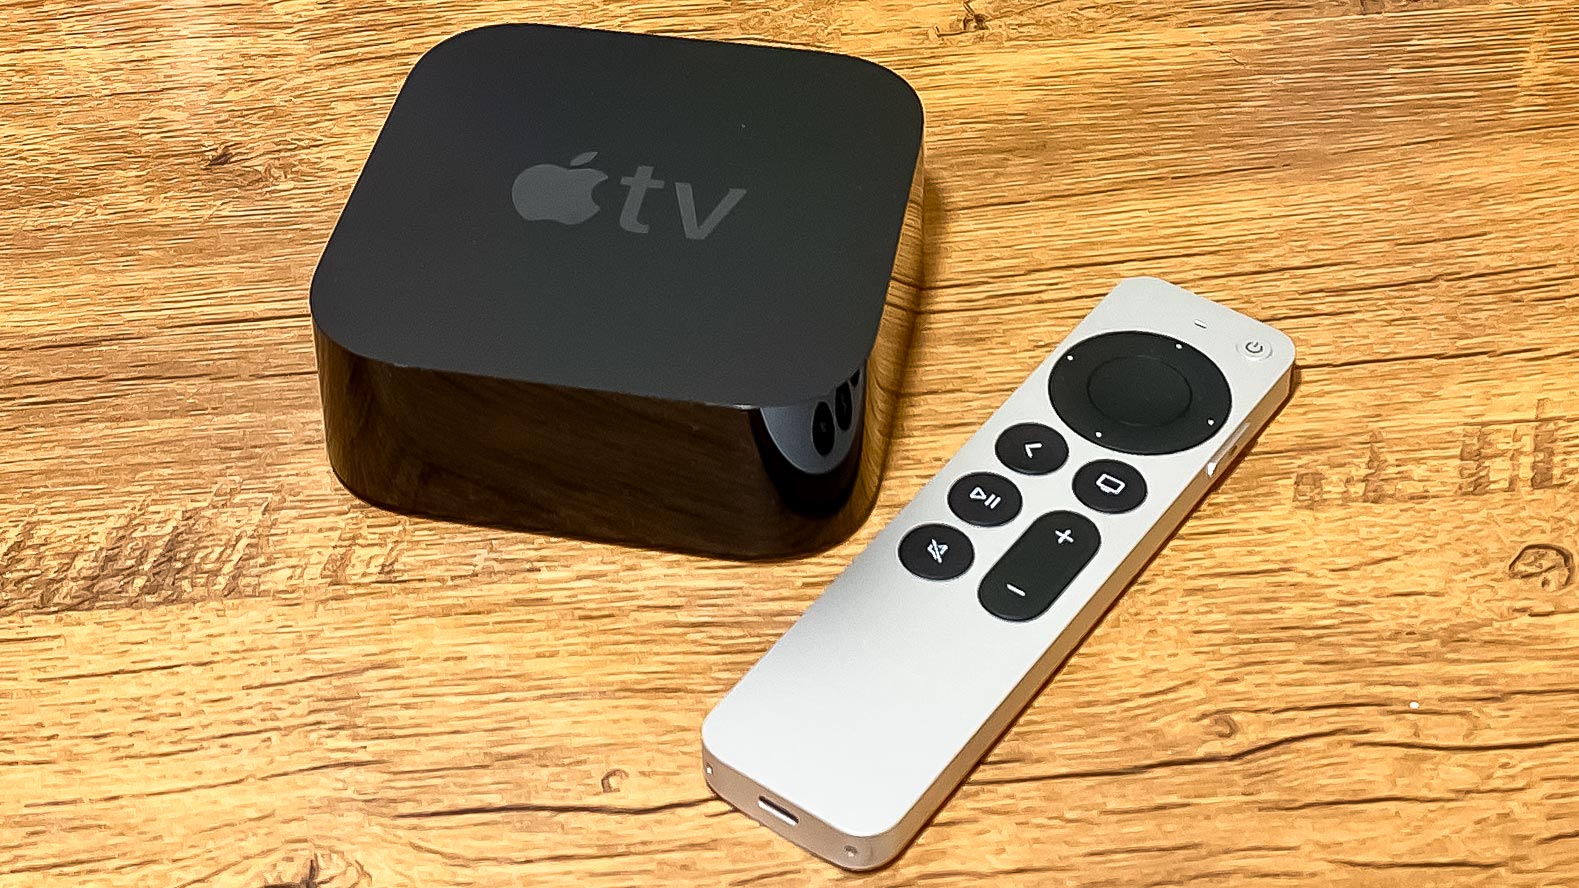 Ecu love Apple TV 4K - but it needs to copy that Roku and Hearth TV feature